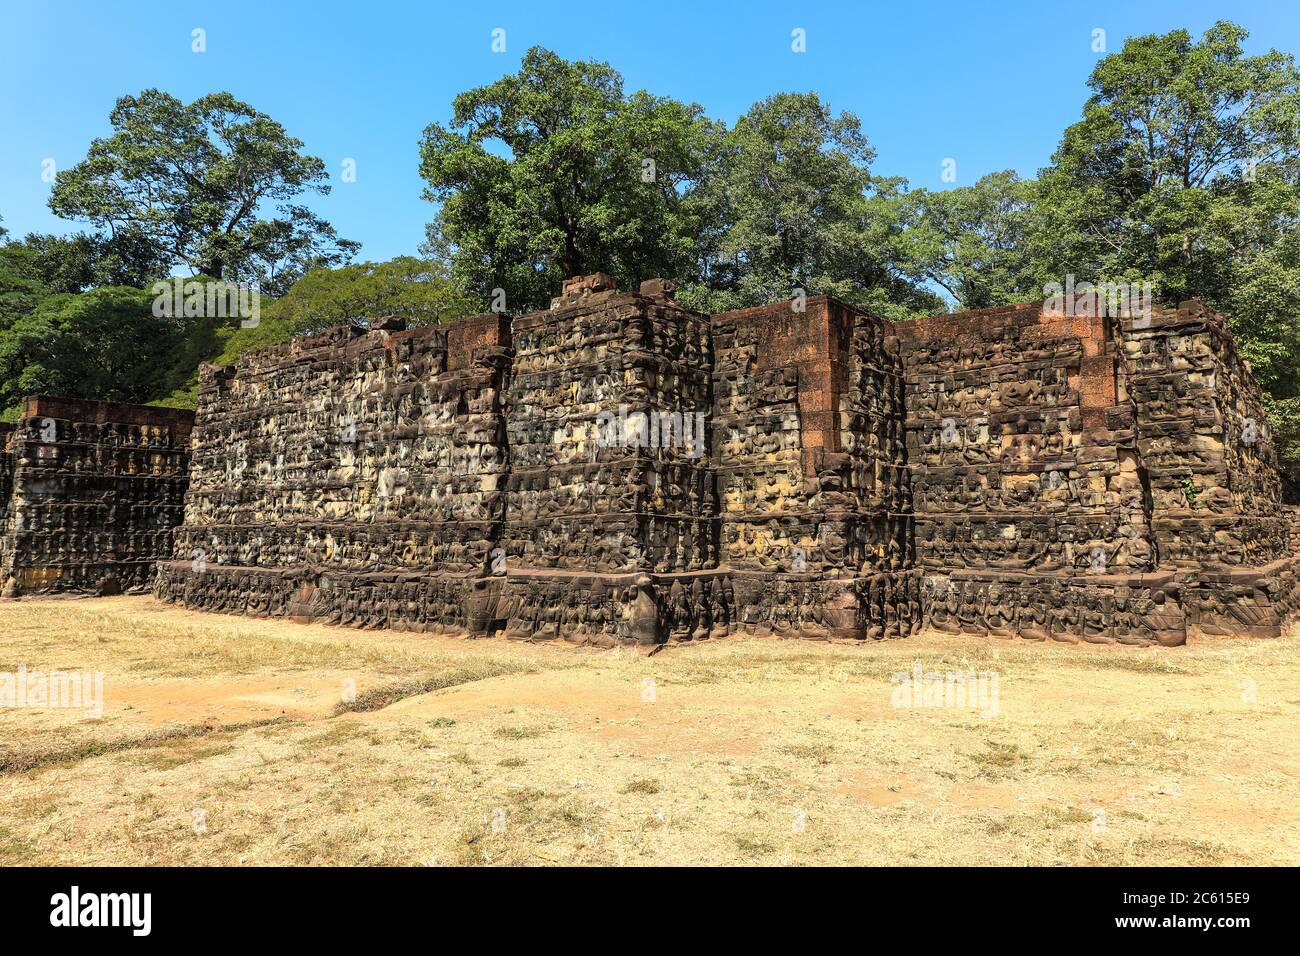 The Leper King Terrace at the Angkor Thom temple complex, Siem Reap, Cambodia, Asia Stock Photo